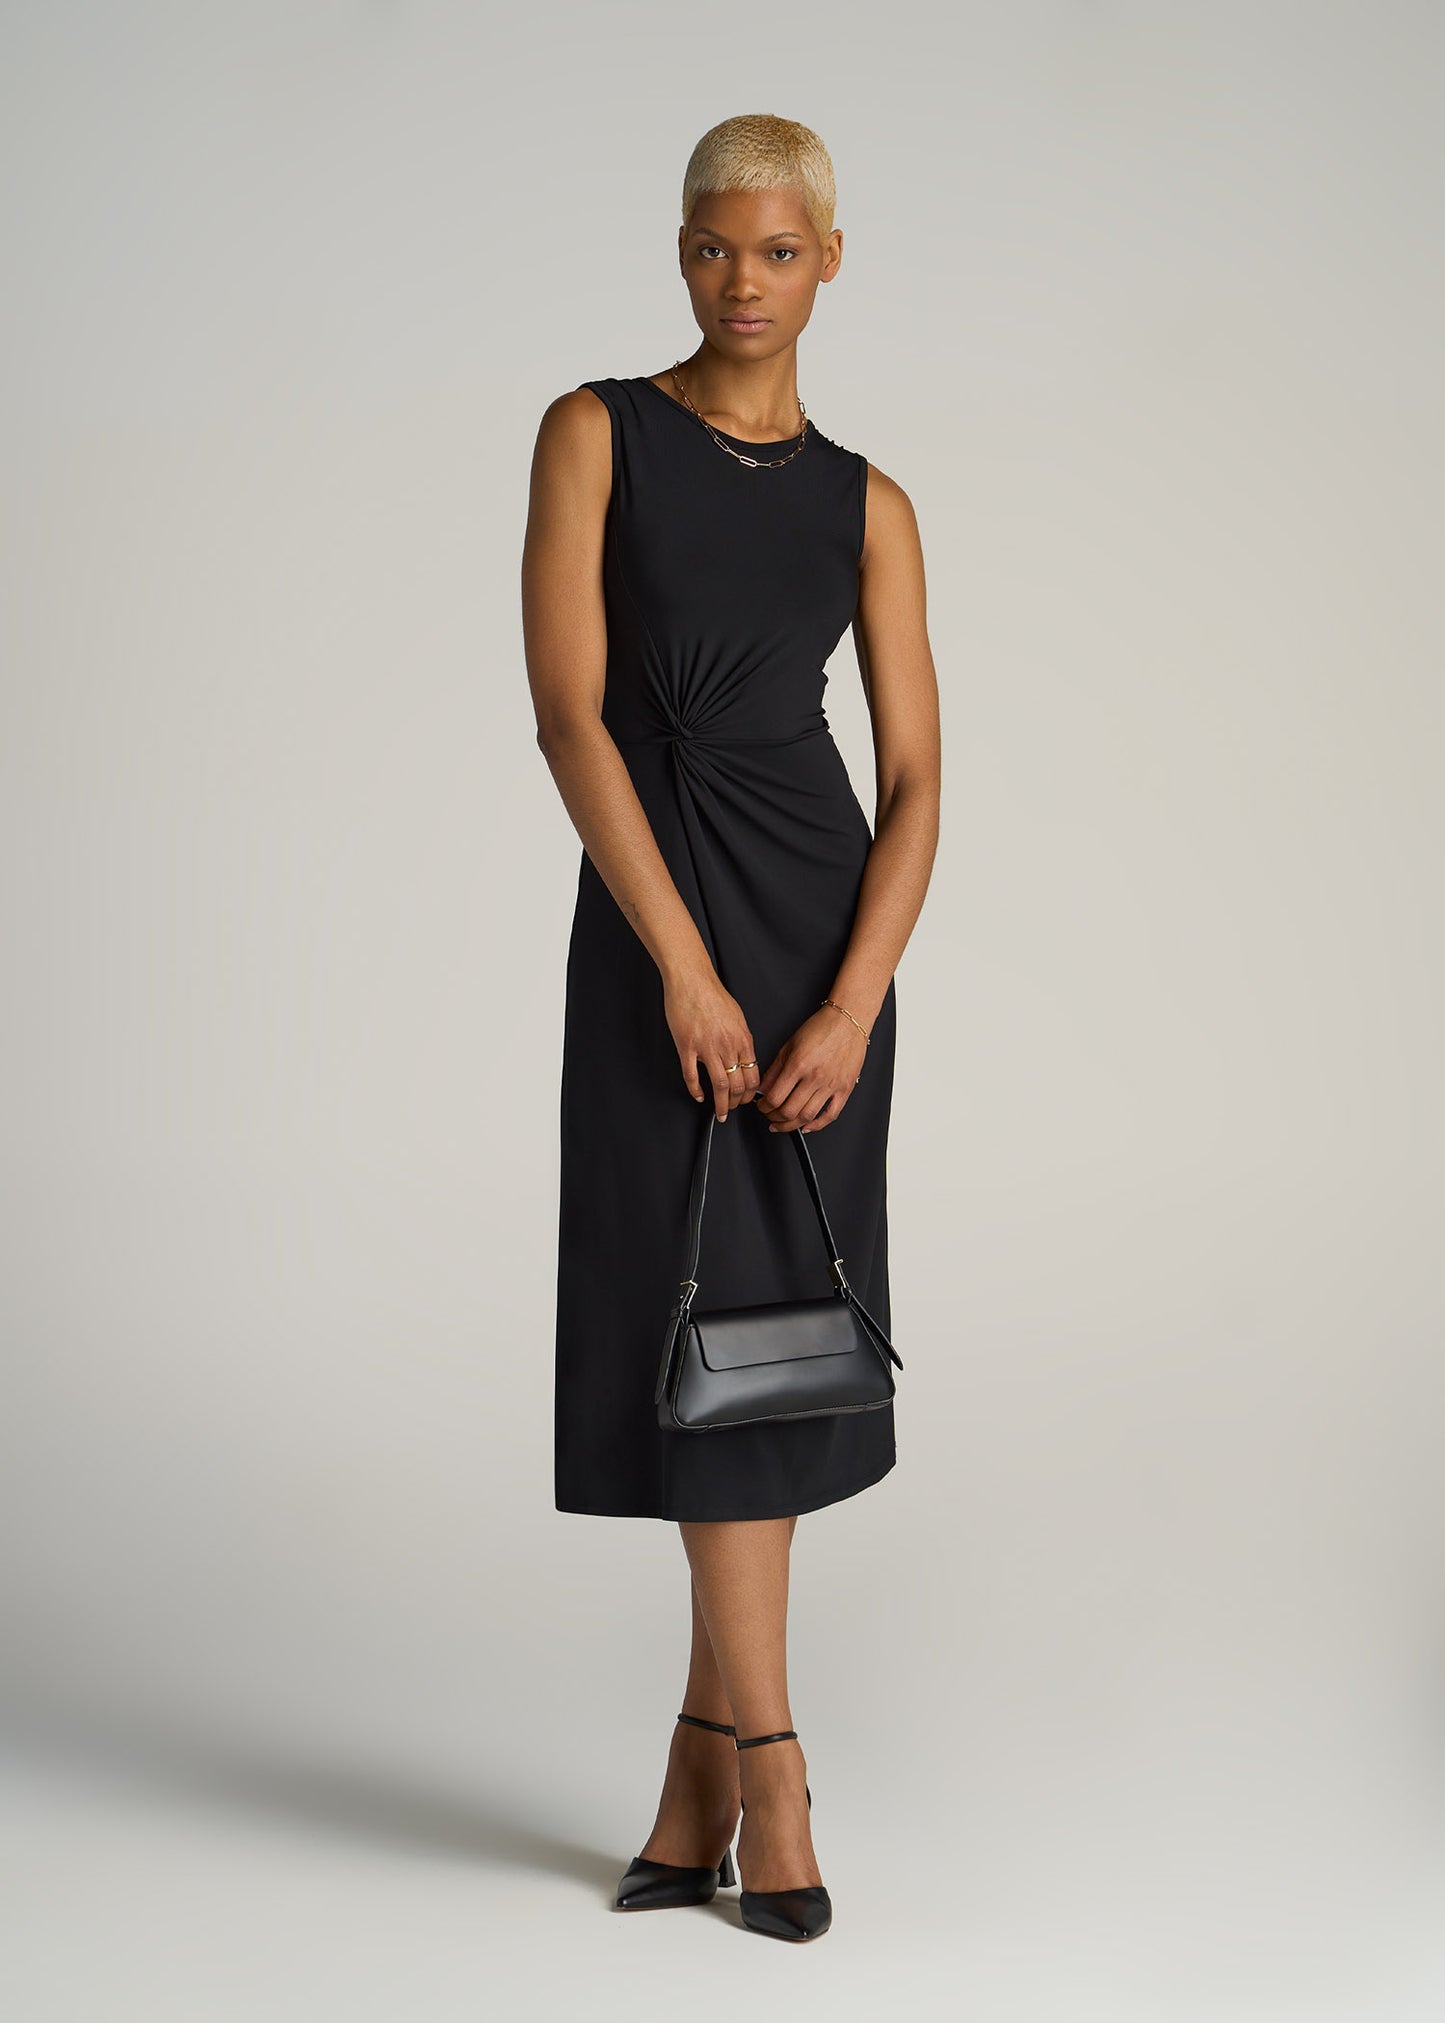 A tall woman wearing Sleeveless Knot Front Dress for Tall Women in Black from American Tall